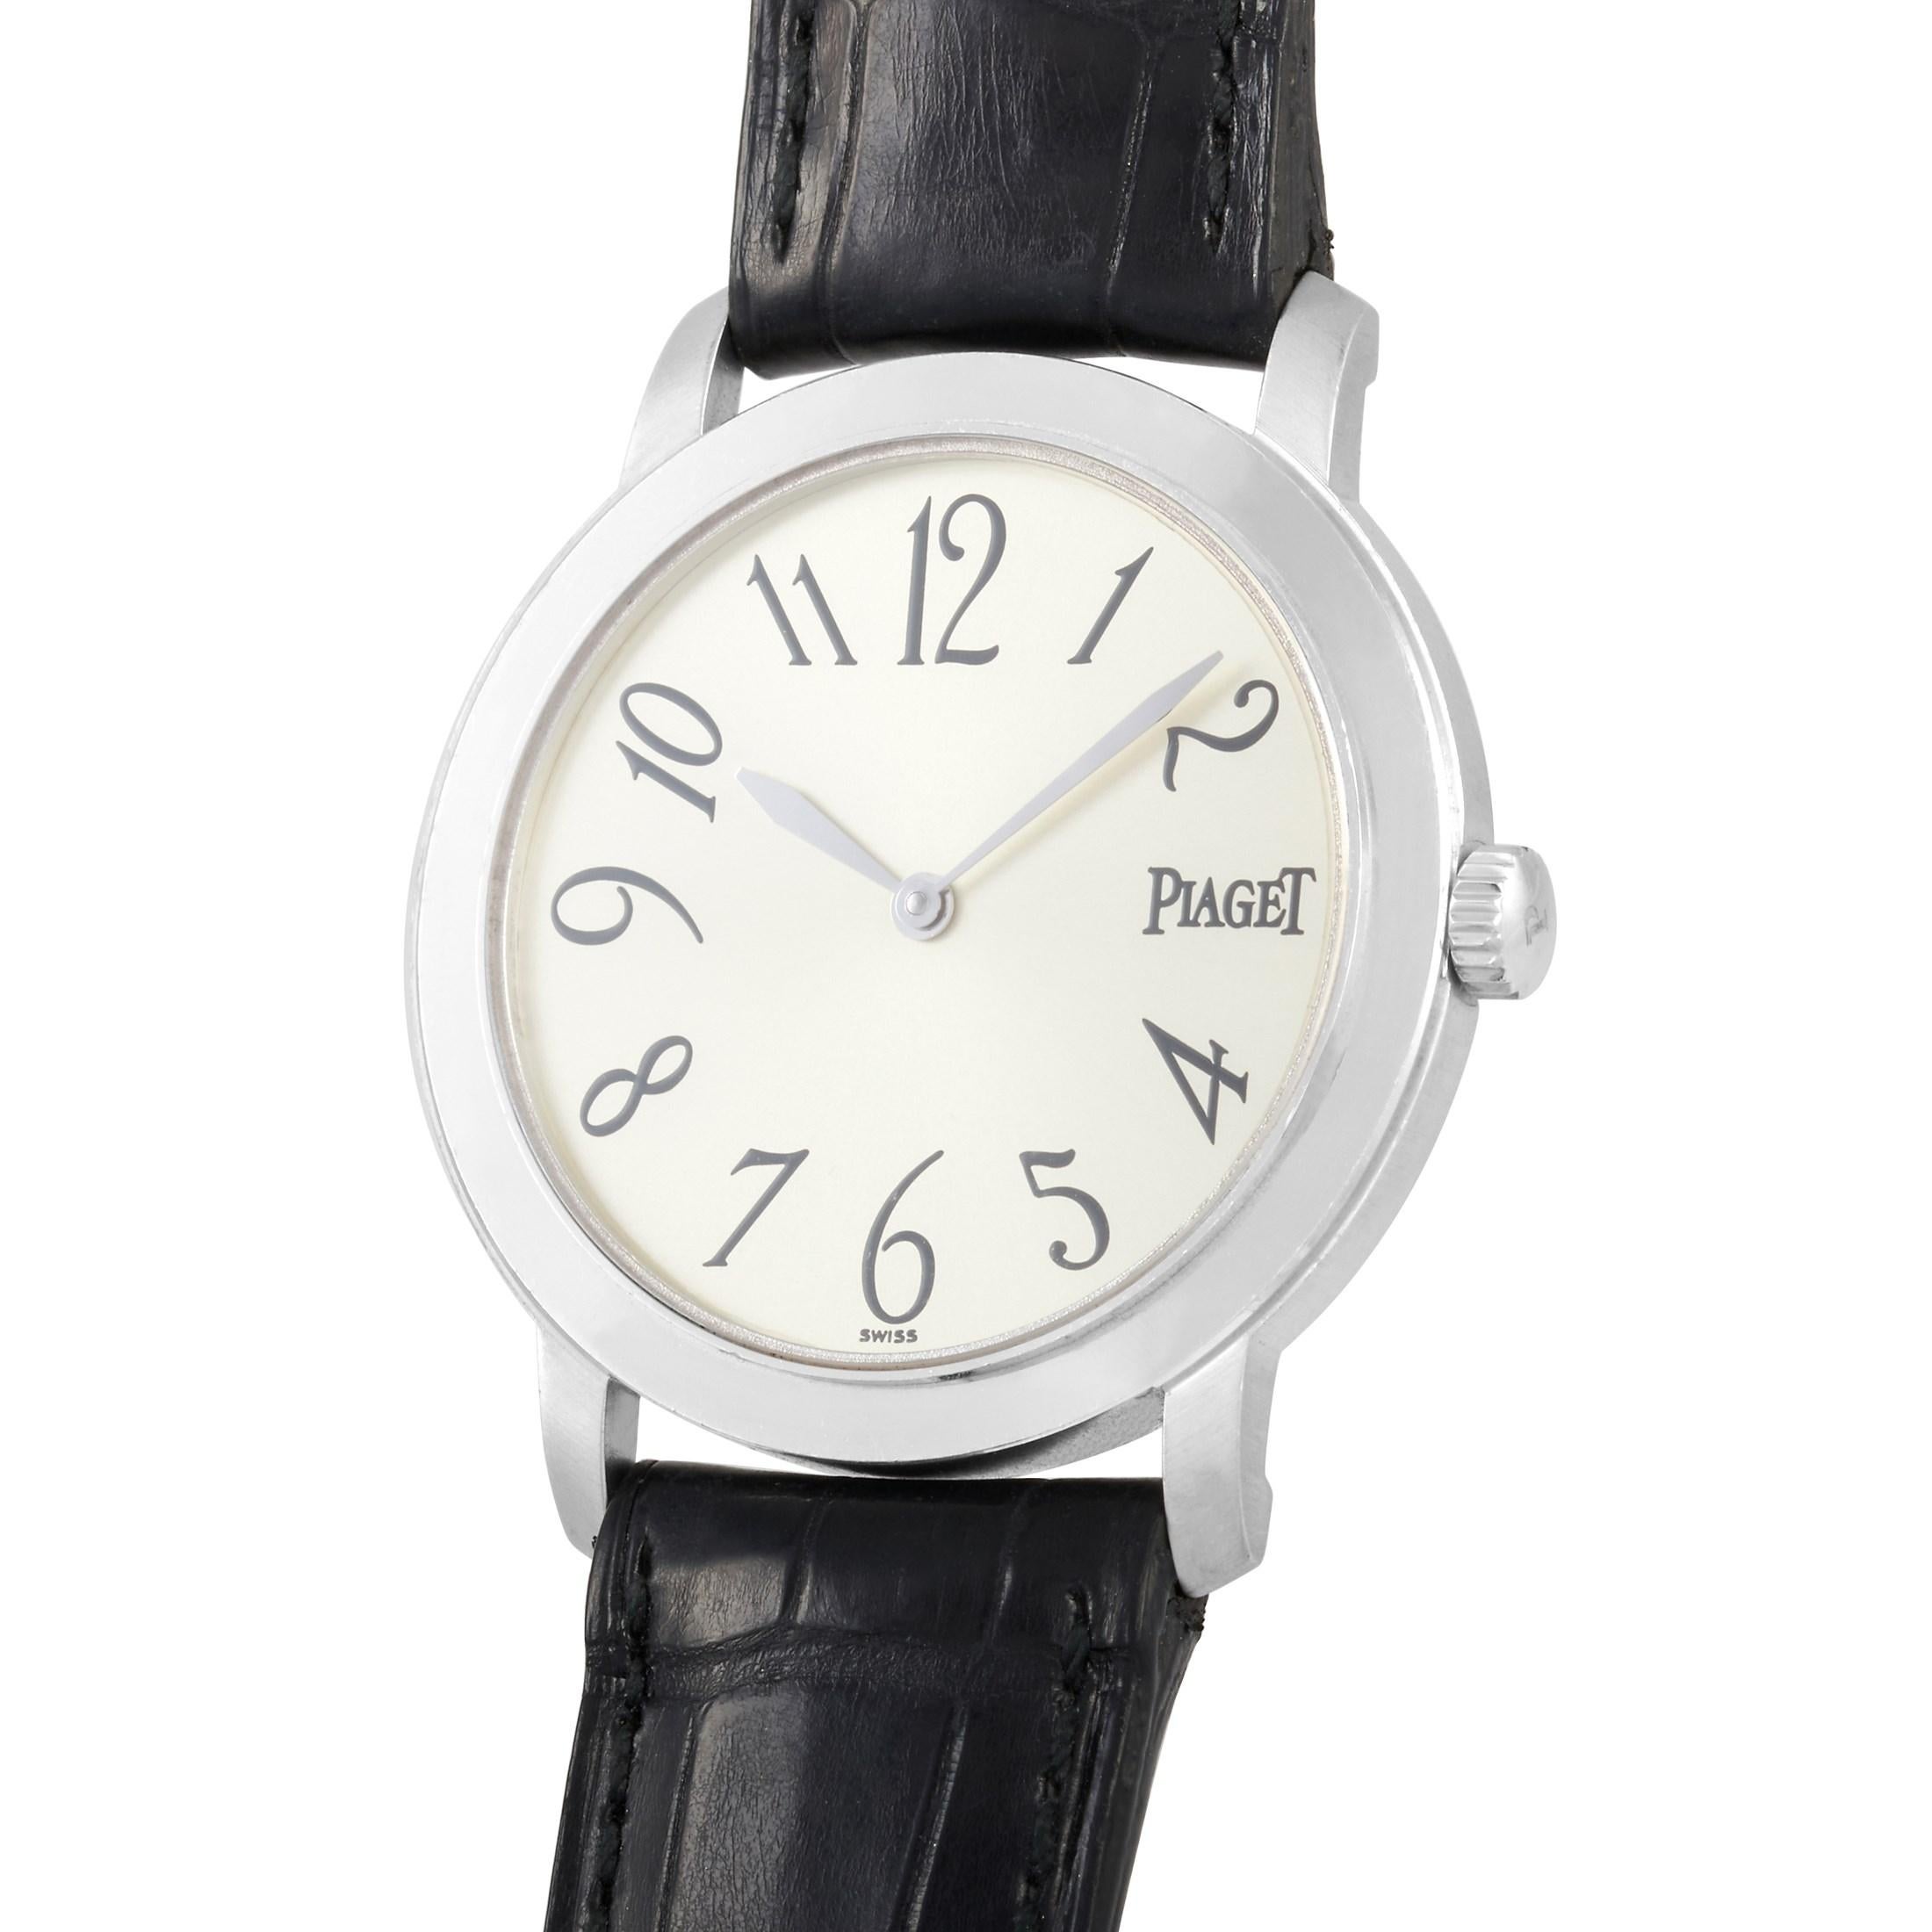 This Piaget Altiplano 18K White Gold 34mm Watch, reference number 850215, comes with a 18K white gold case that measures 33 mm in diameter. The case is presented on a black crocodile leather strap with tang clasp. The solid case back features the